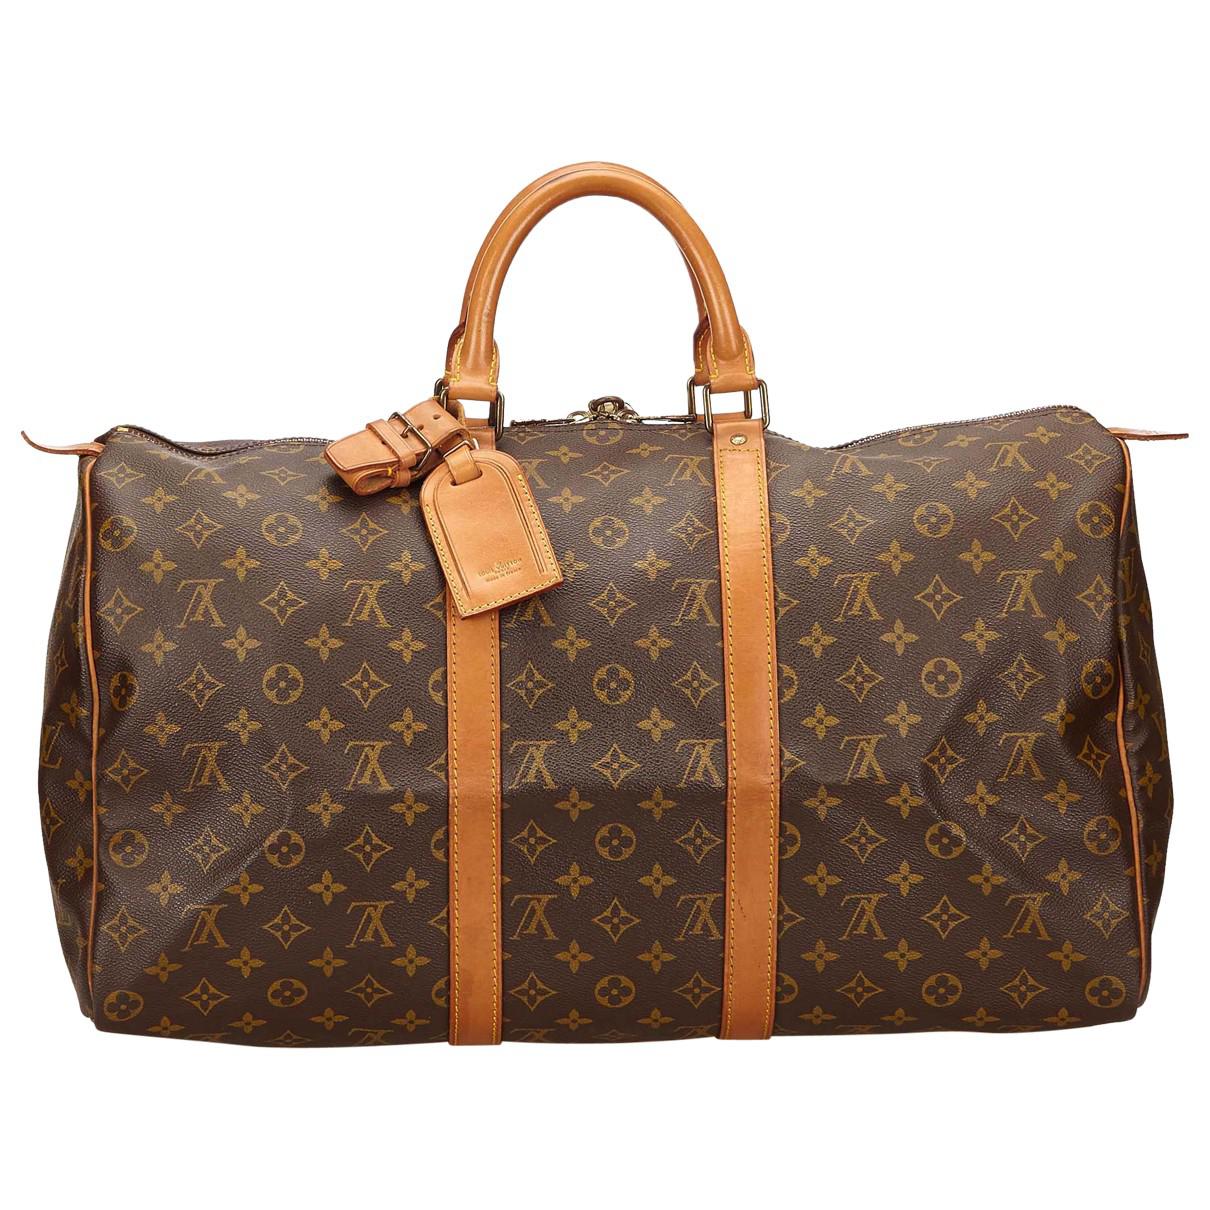 Lyst - Louis Vuitton Pre-owned Keepall Cloth Travel Bag in Brown